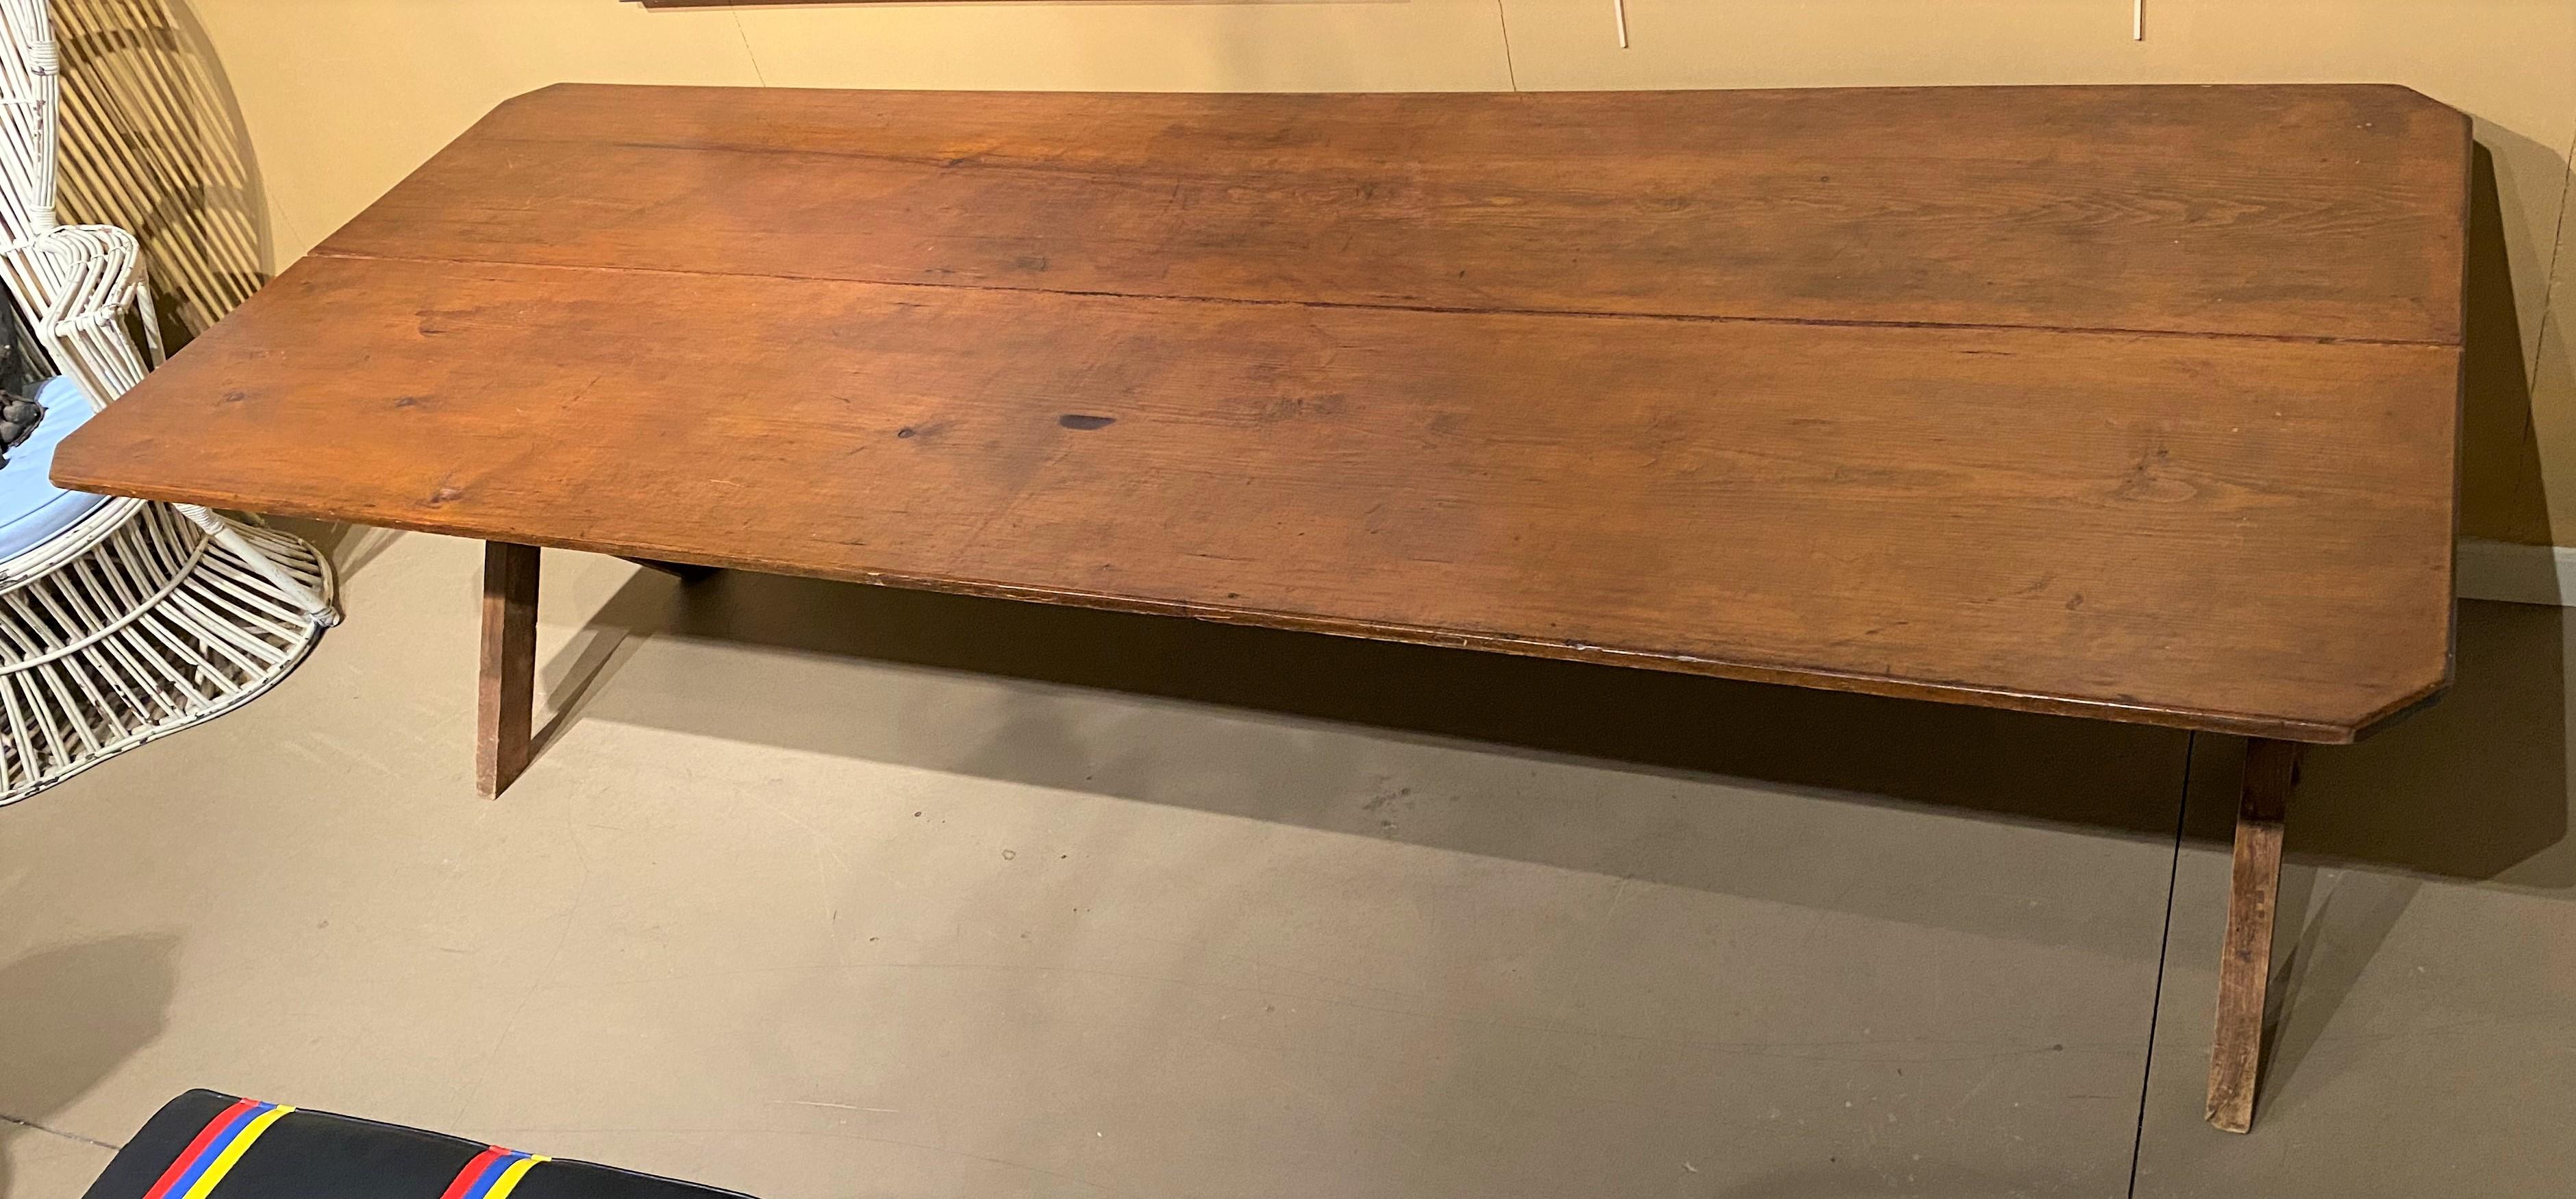 19th century American sawbuck trestle dining table with two board top. The top lifts off and the base can knock down. A great table for a country feast! With its ability to break down and be easily moved, it is also perfect to bring outside for al